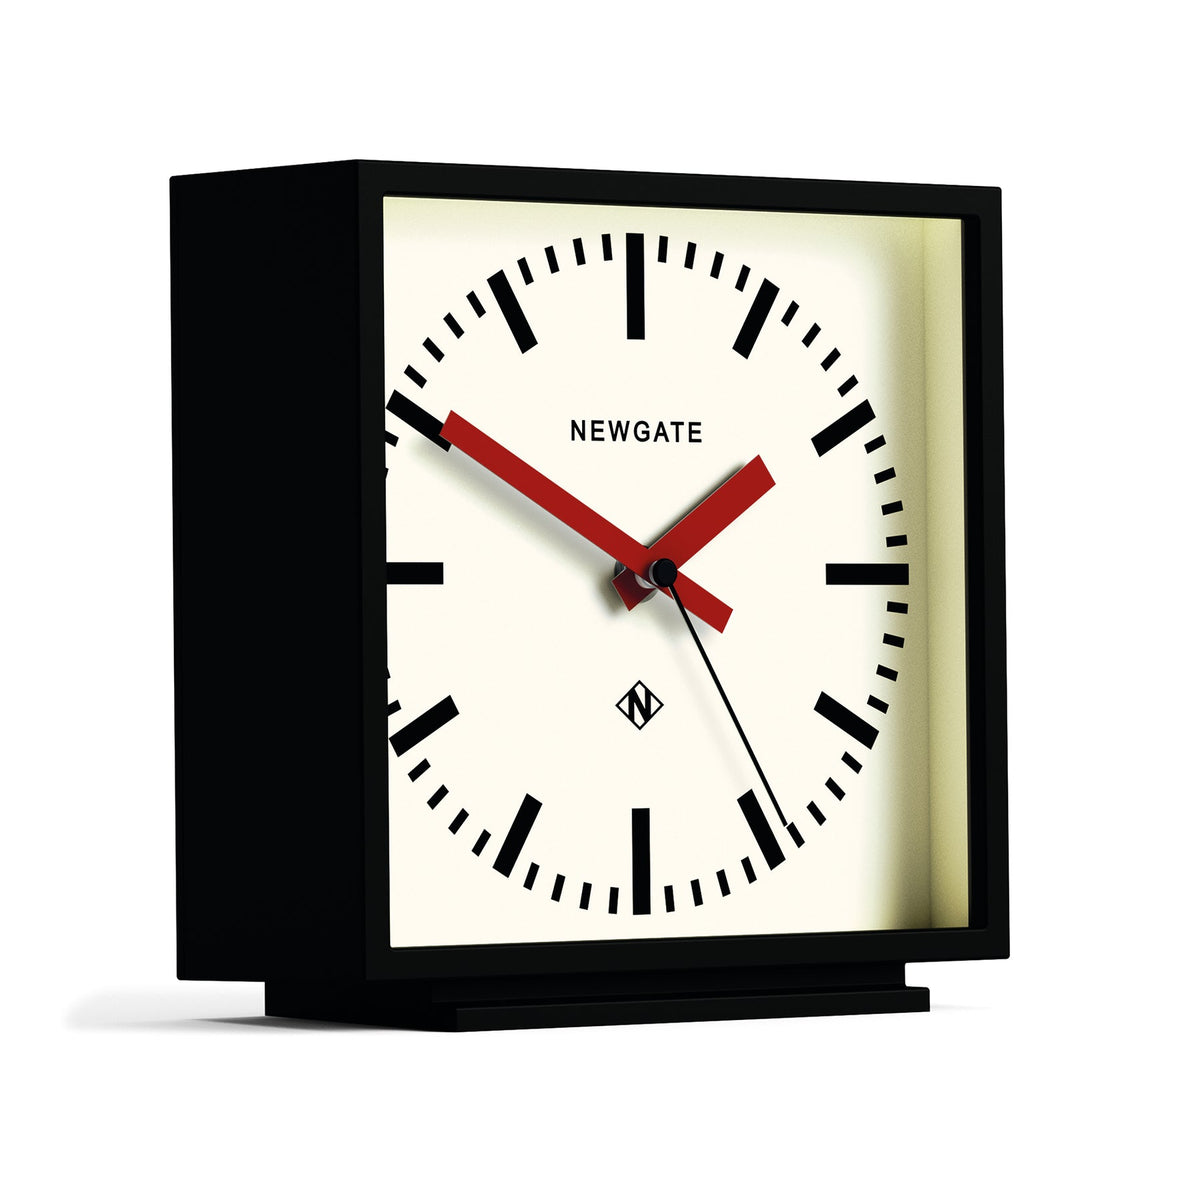 Newgate Amp Mantel Clock Black With Red Hands - Notbrand